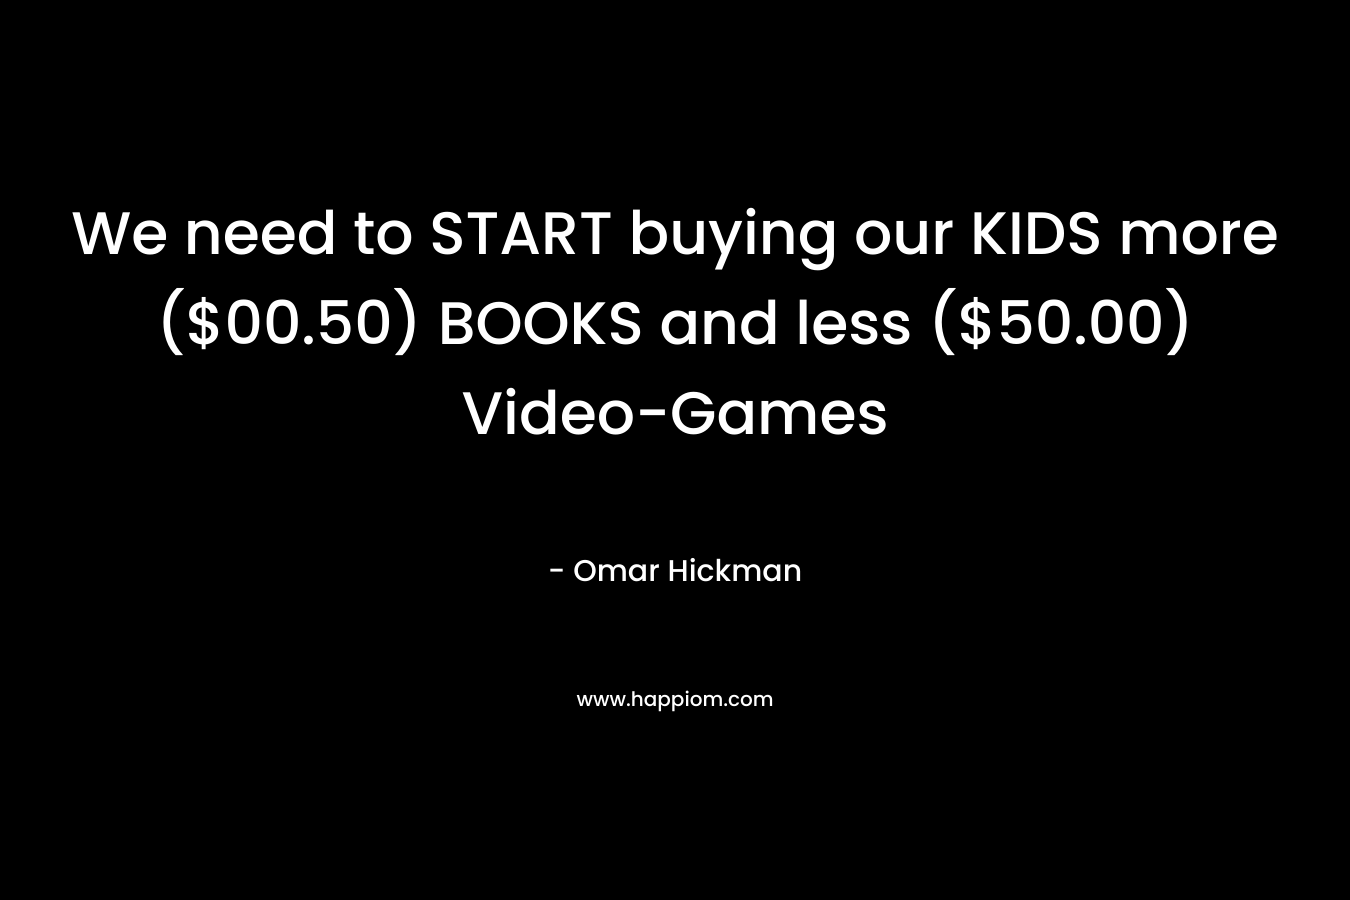 We need to START buying our KIDS more ($00.50) BOOKS and less ($50.00) Video-Games